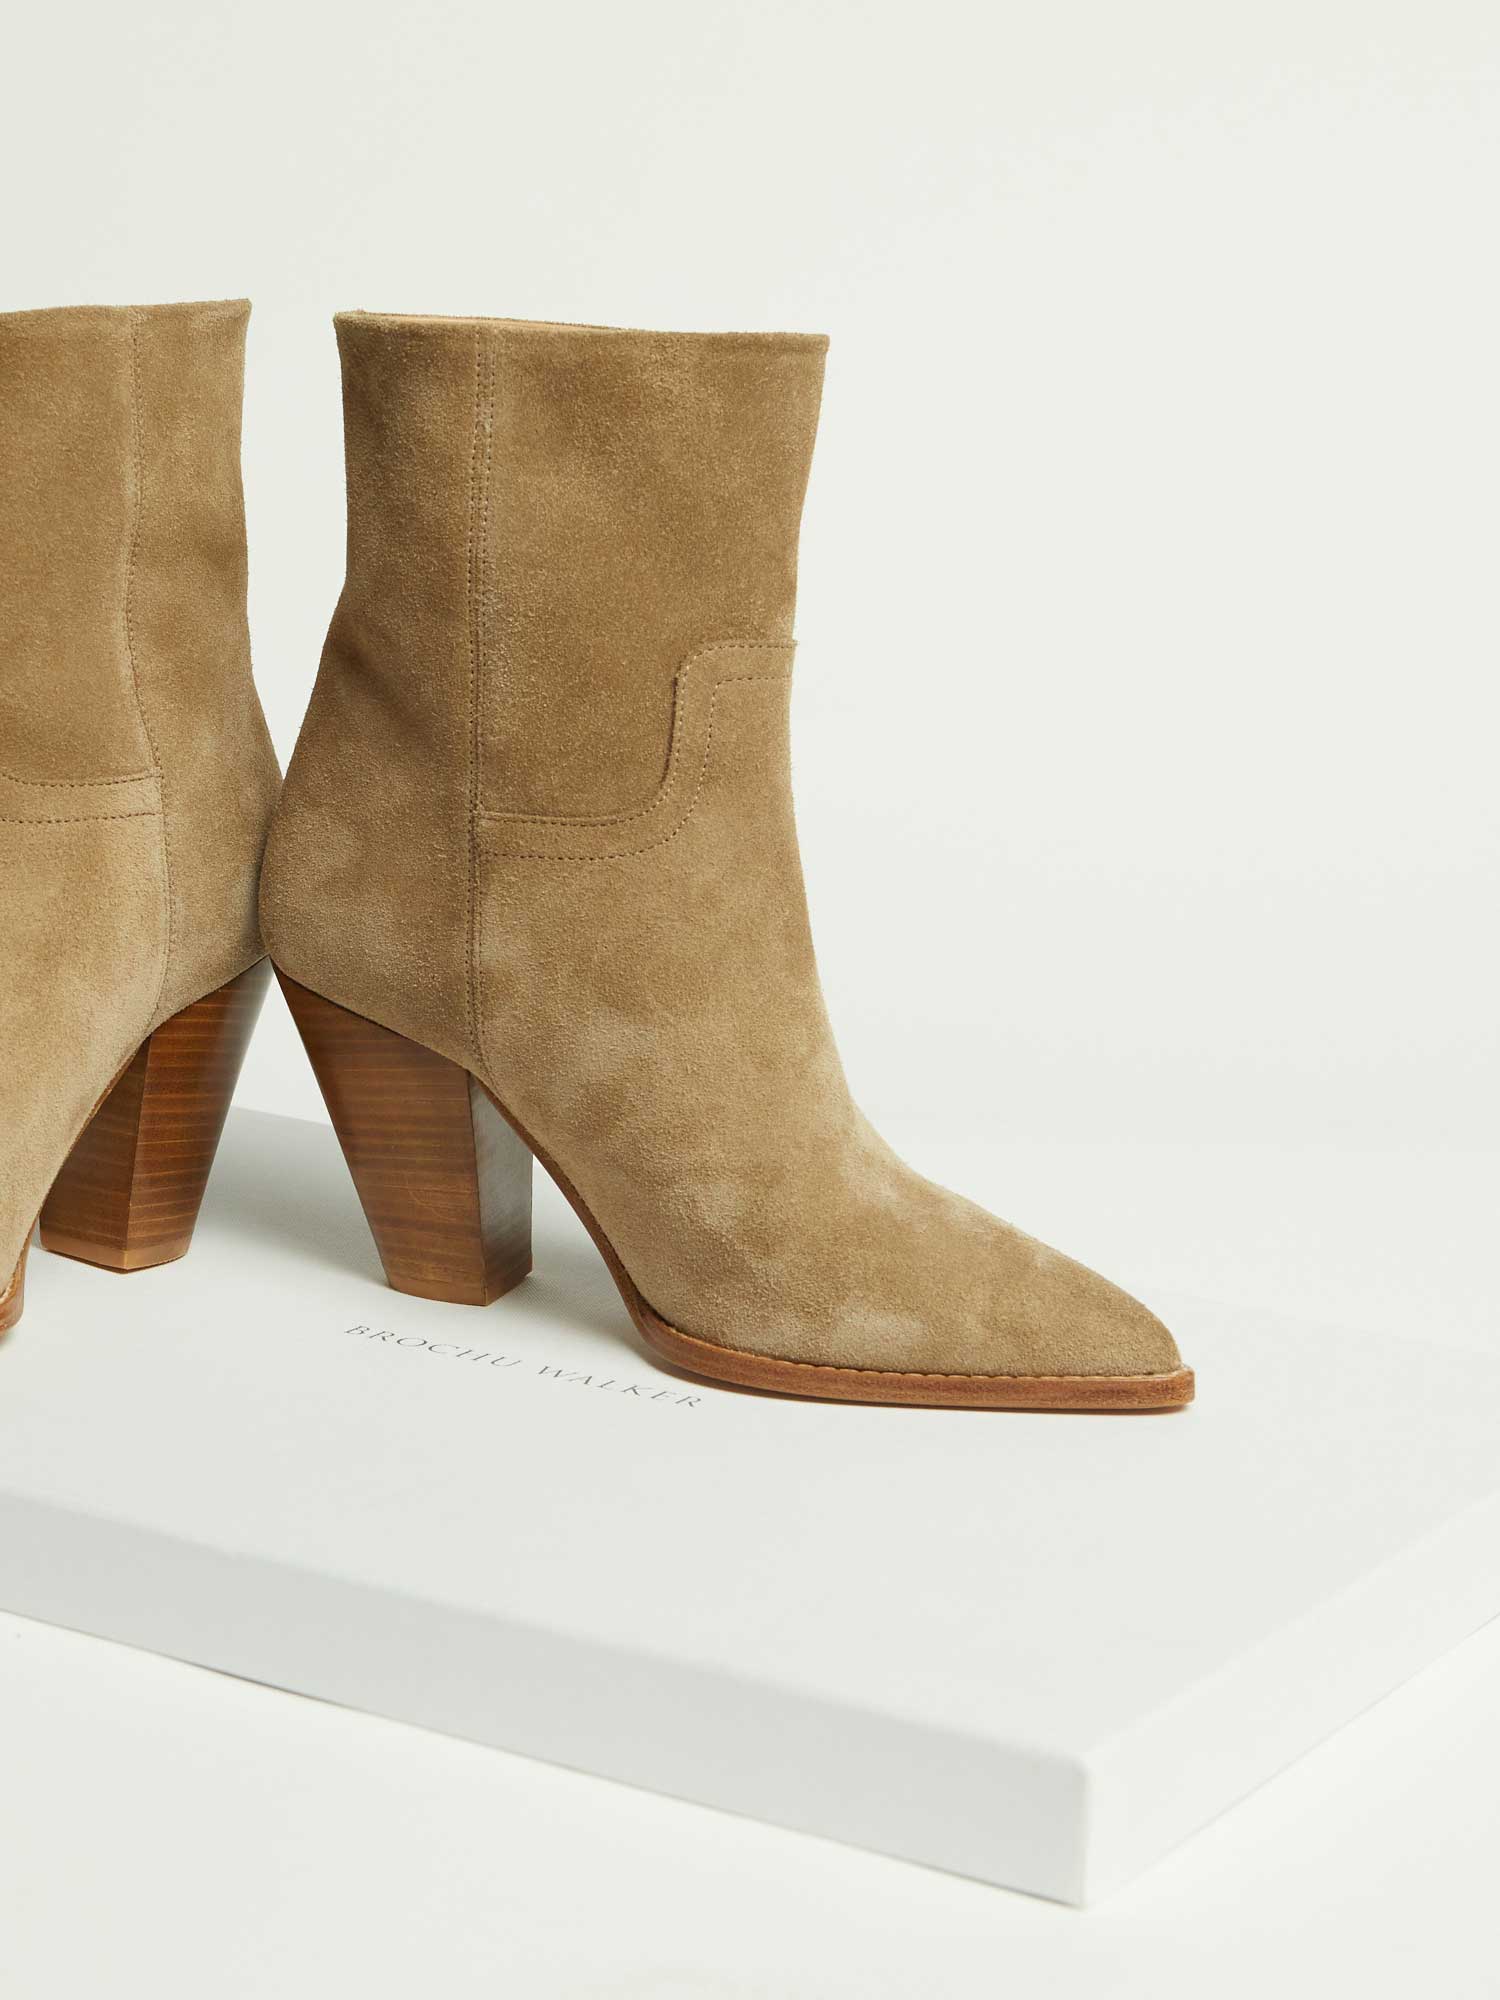 The Marfa Suede Ankle Boot